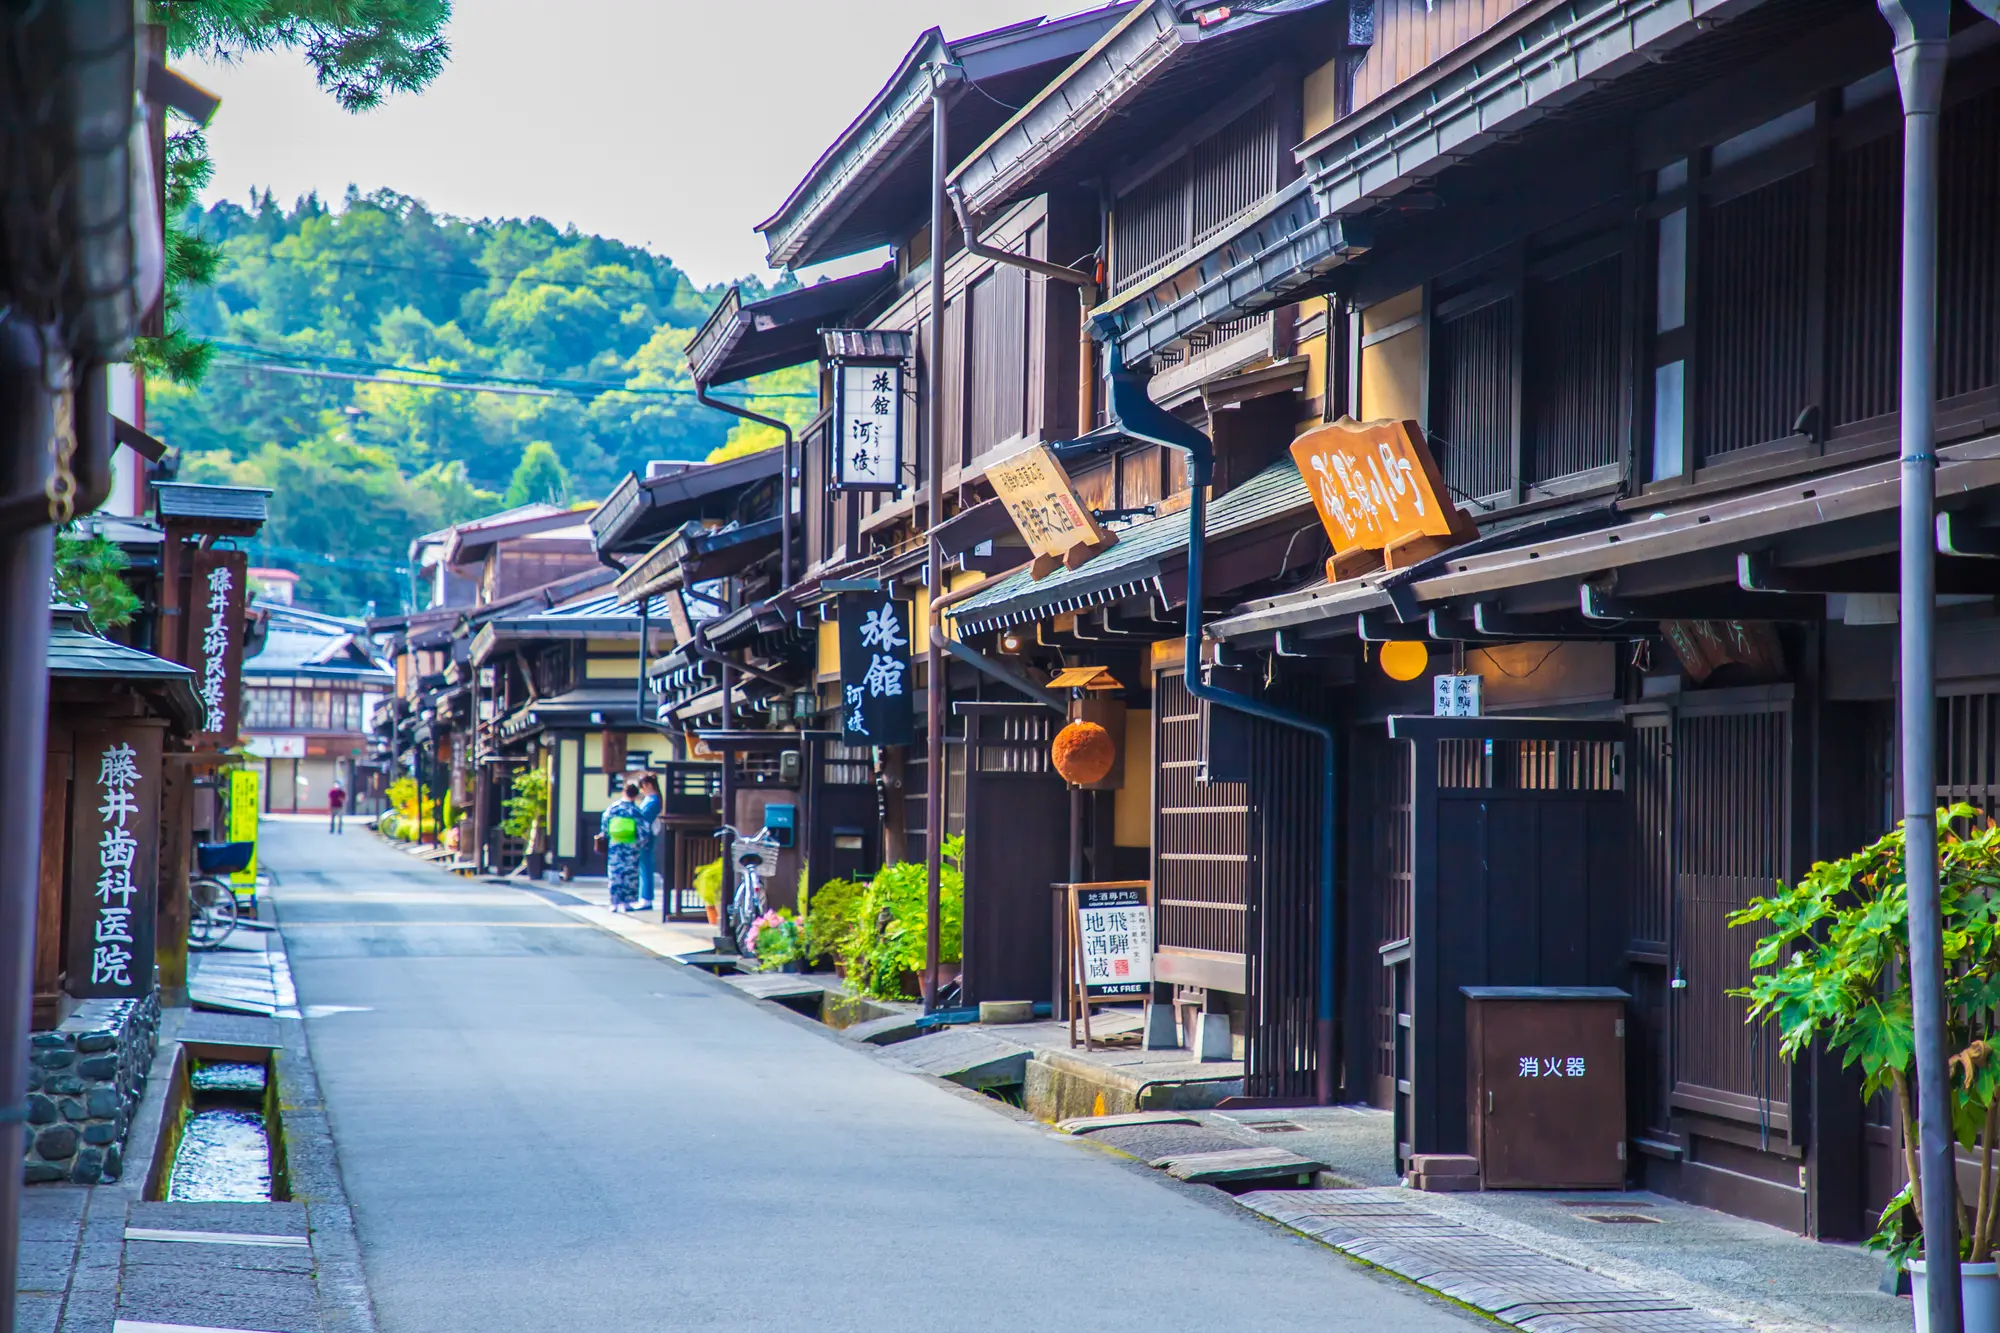 Explore the timeless charm of Hida Takayama, a traditional Japanese town